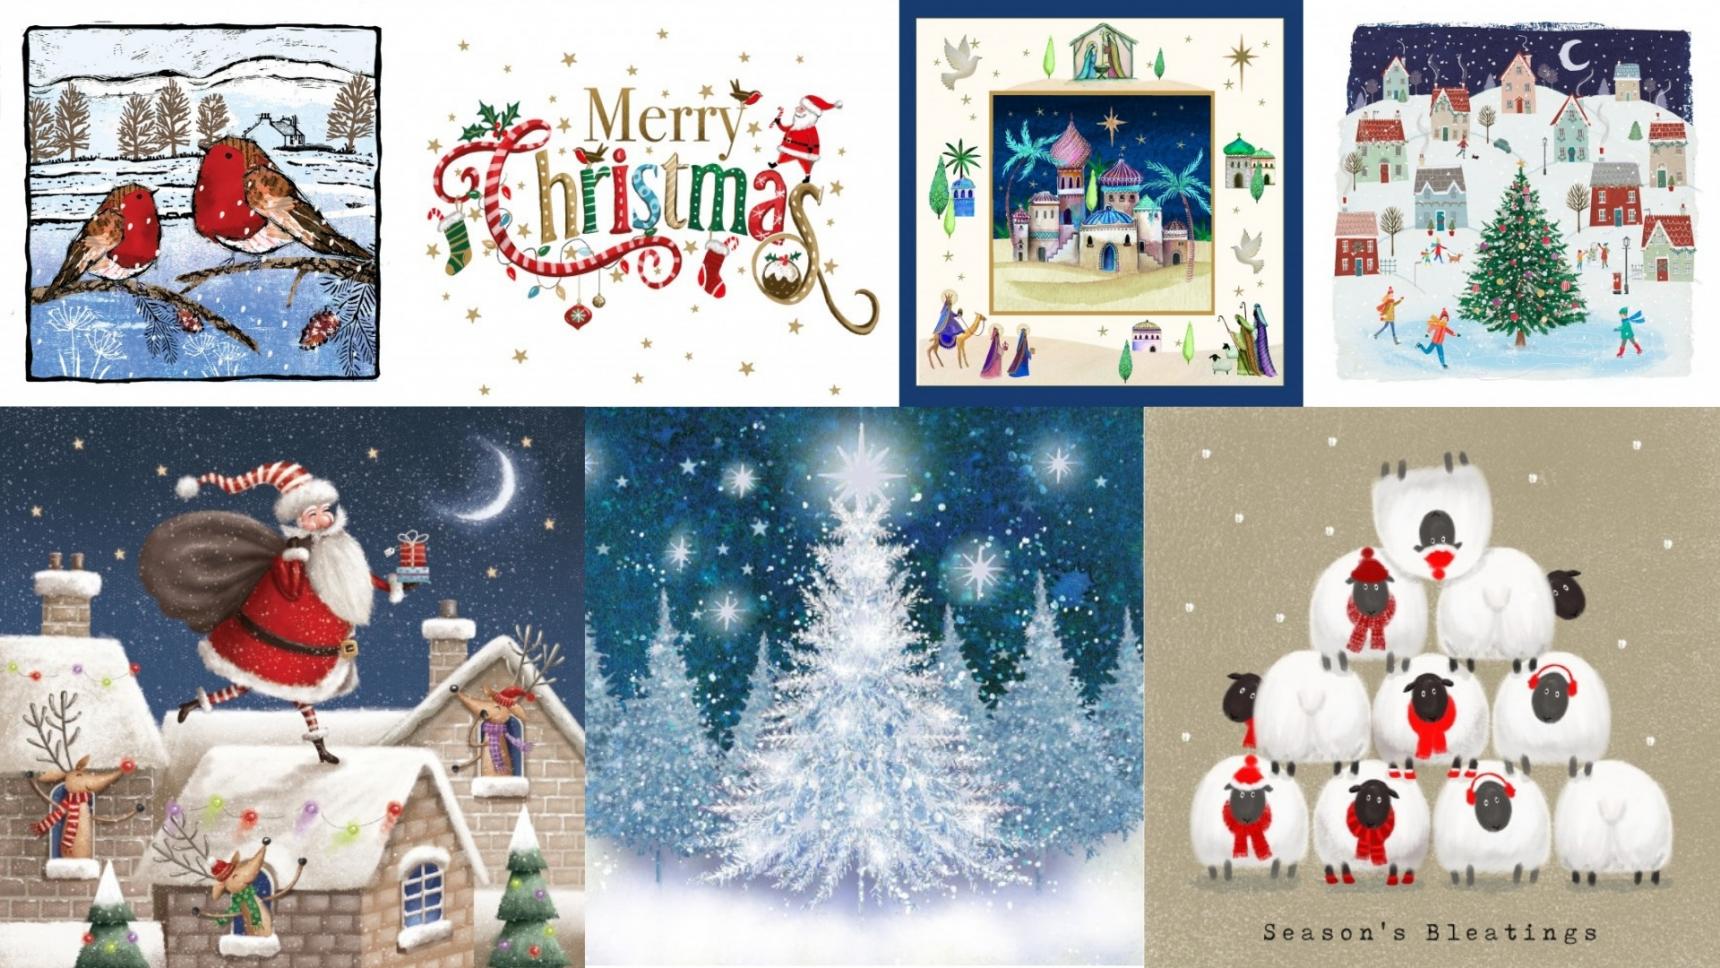 Charity Christmas Cards 2019 Snowballs and The Lost Ball 20 Christmas Cards for Charity 80p in Support of The Alzheimers Society 